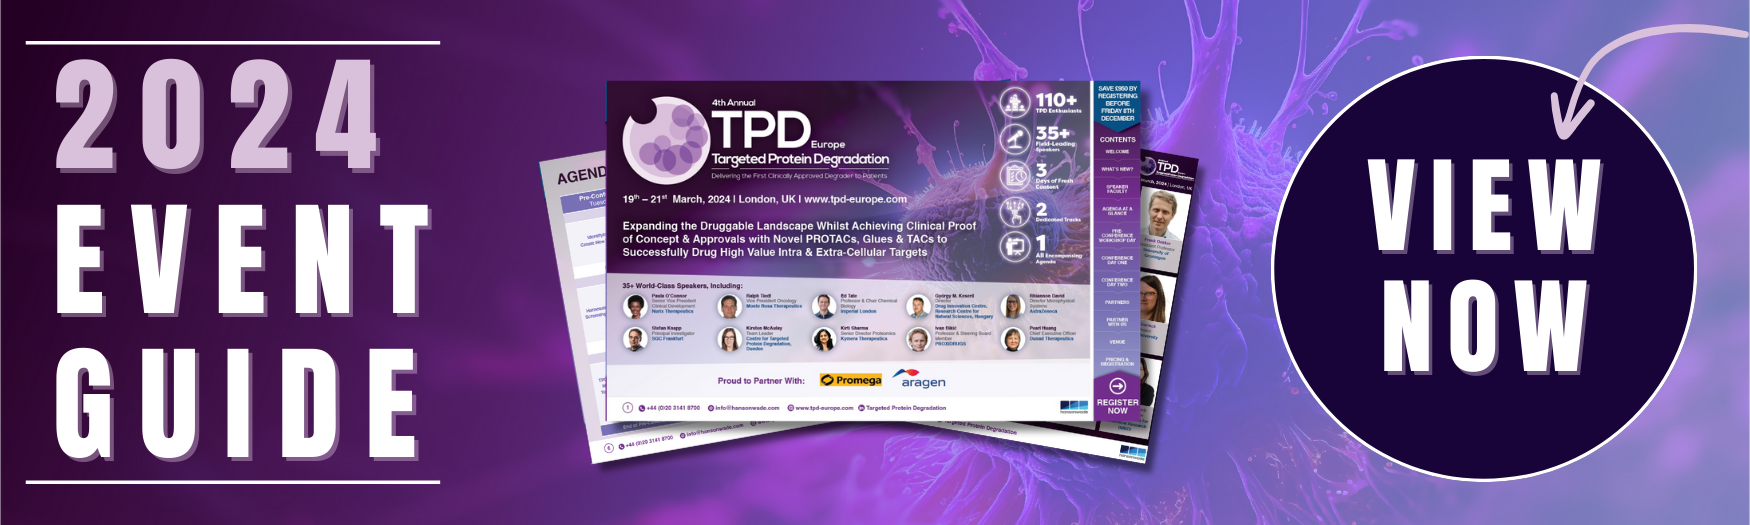 Download the 4th TPD EU Event Guide!